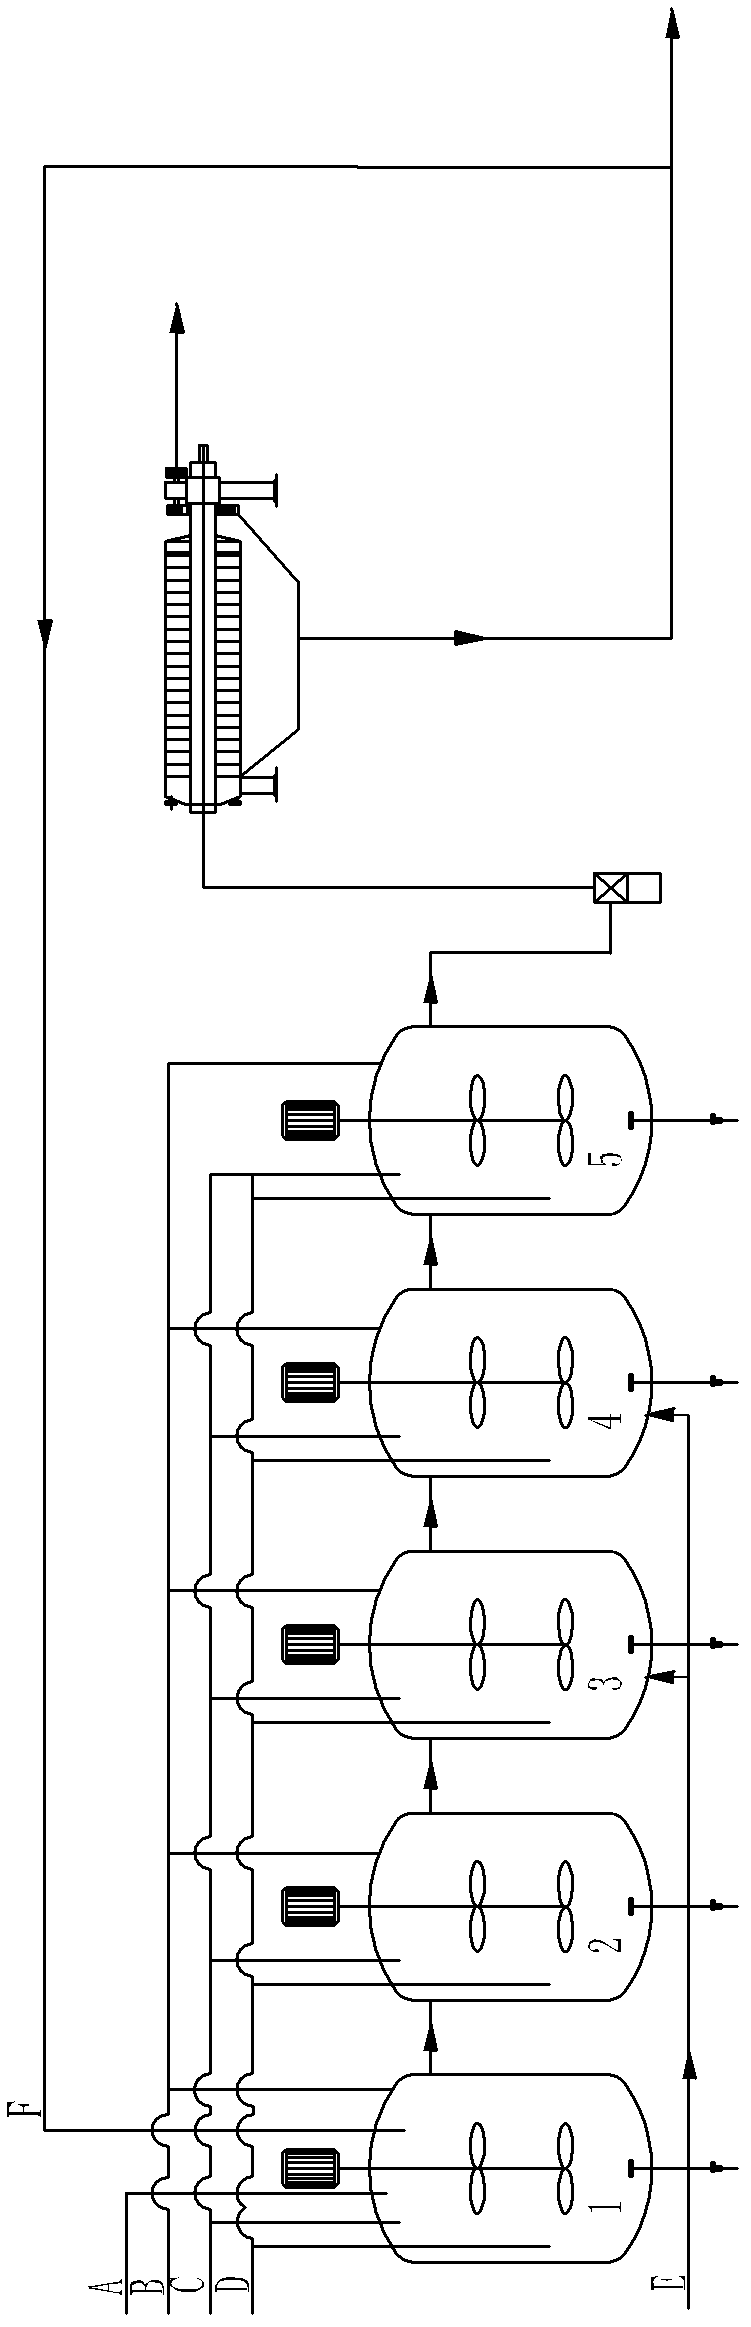 Method for low-temperature deironing by using mixed gas of air and sulfur dioxide (SO2)